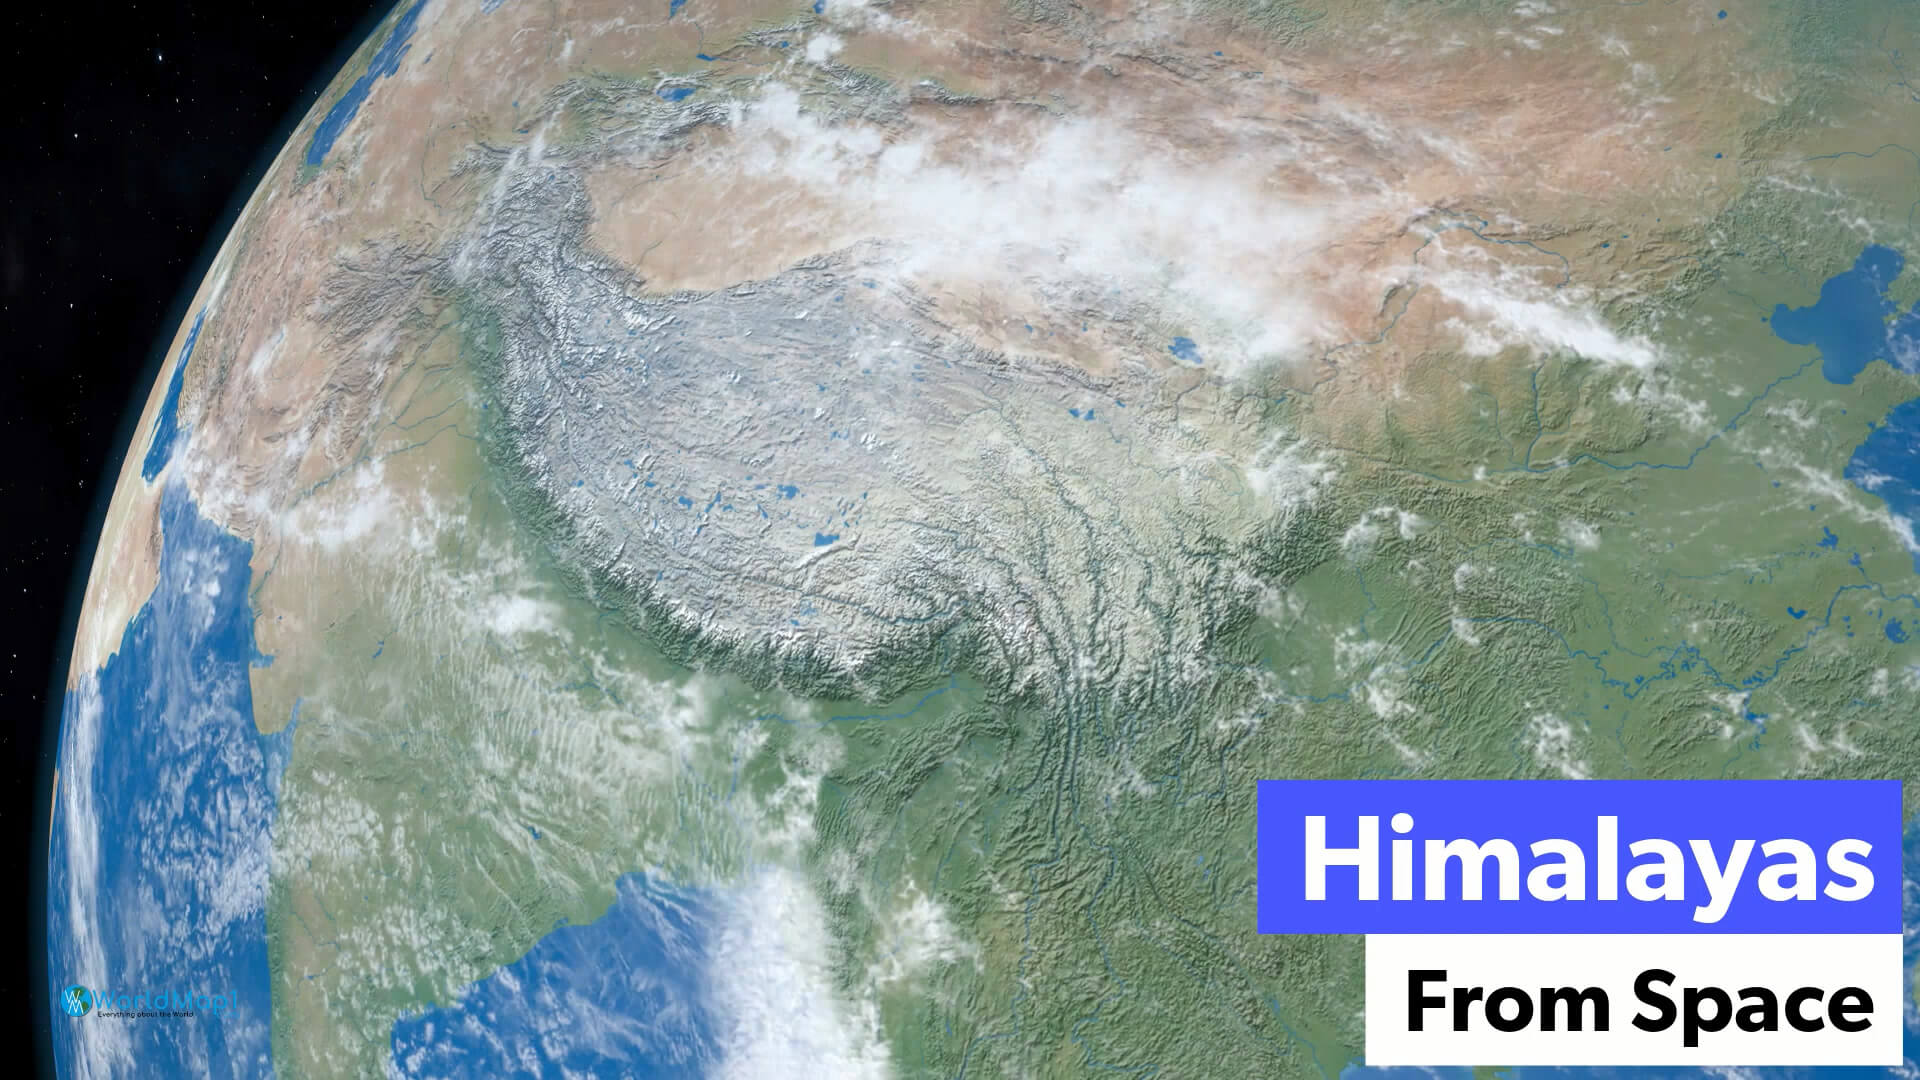 Himalayas from Space